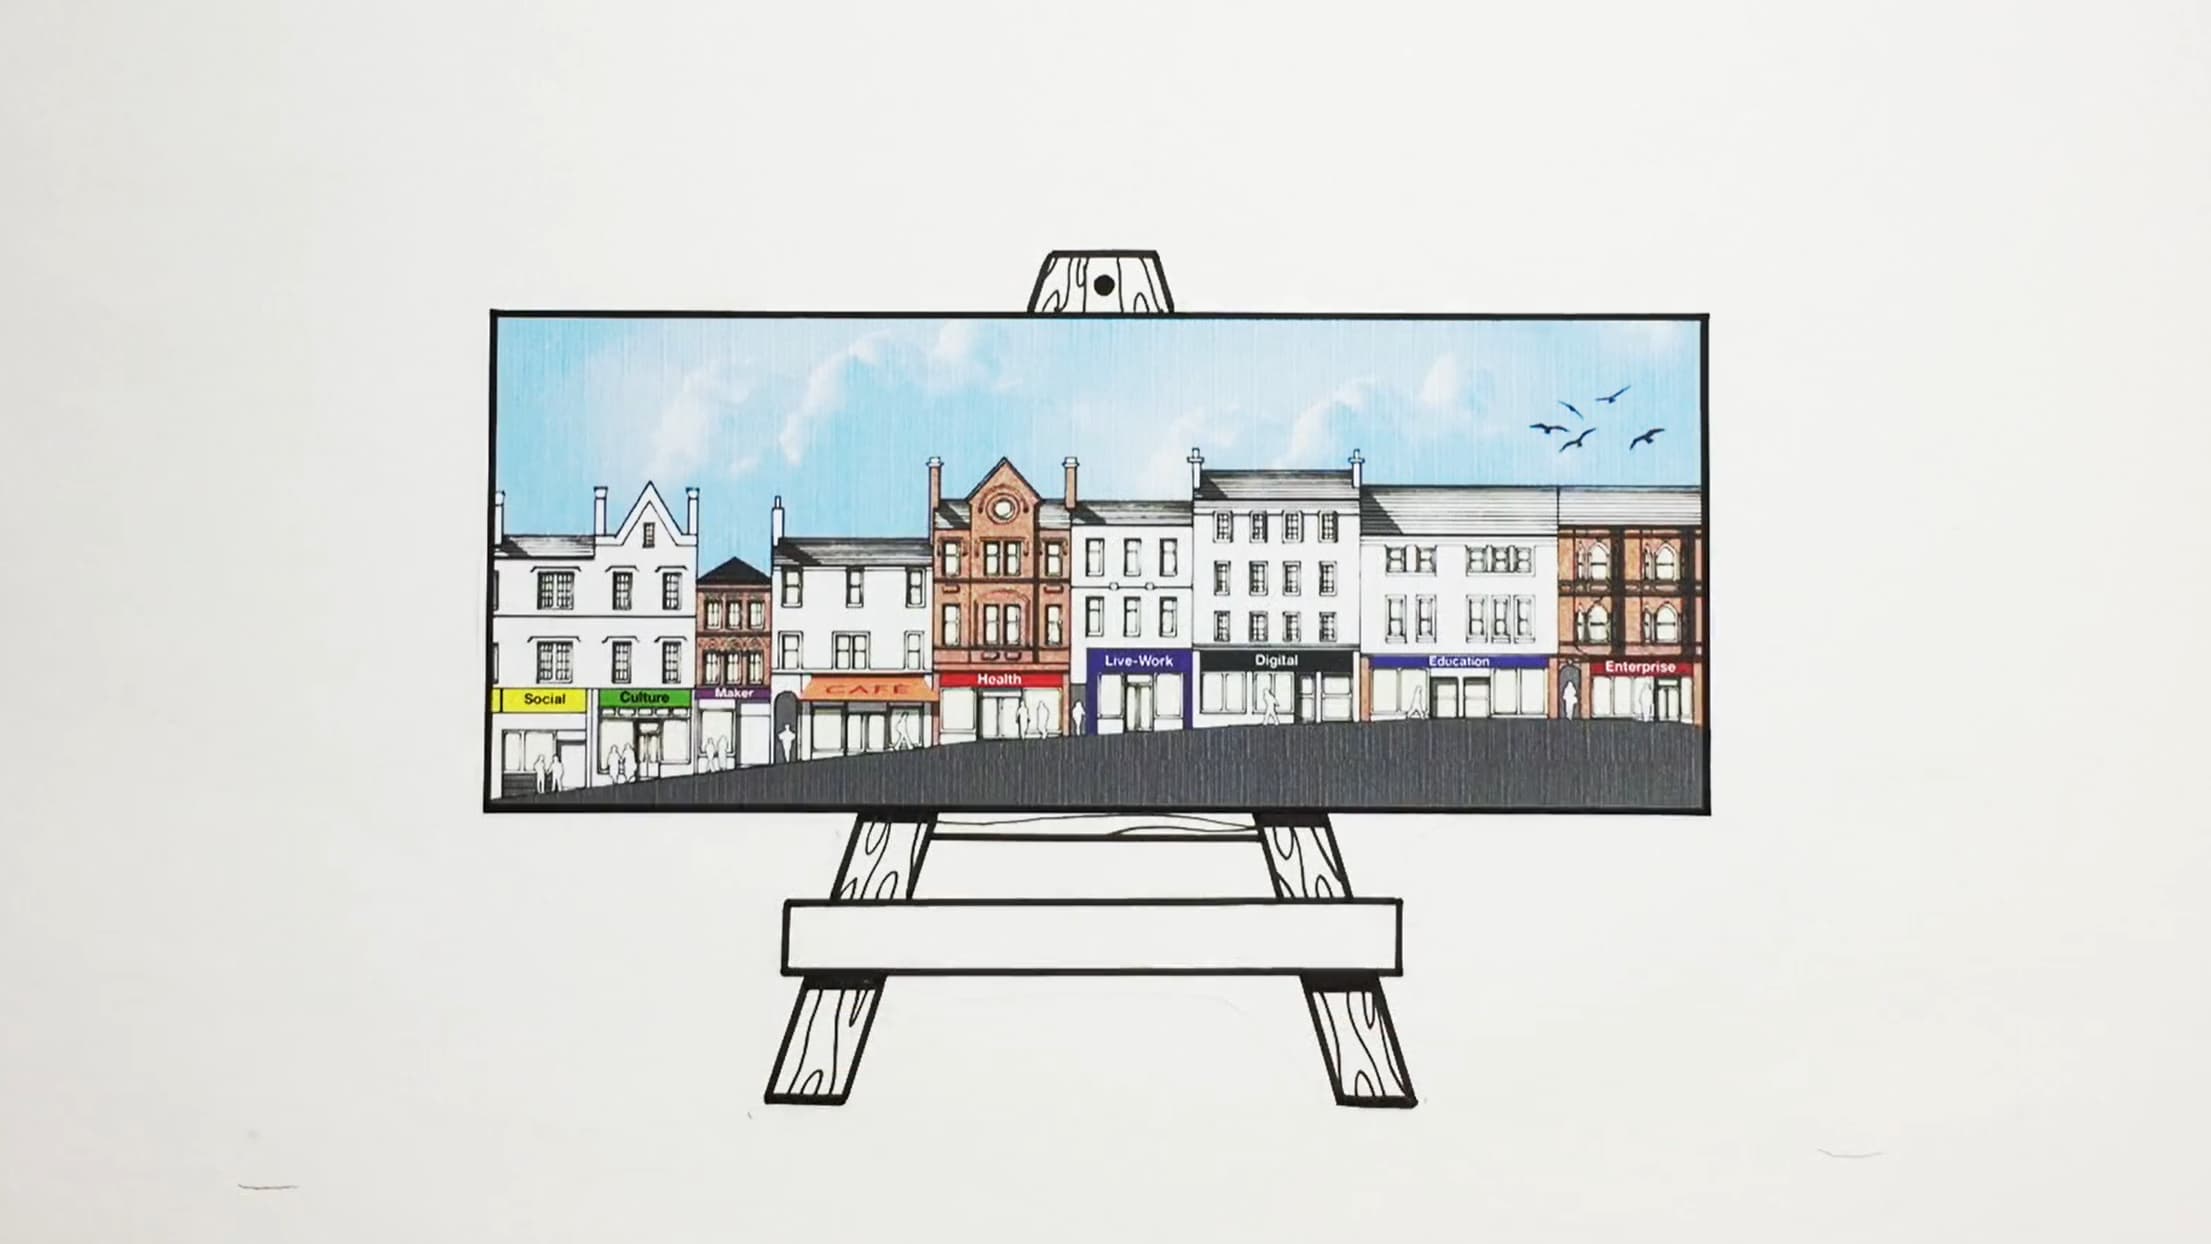 An illustrative drawing of a row of buildings from a town centre drawn on an easel.